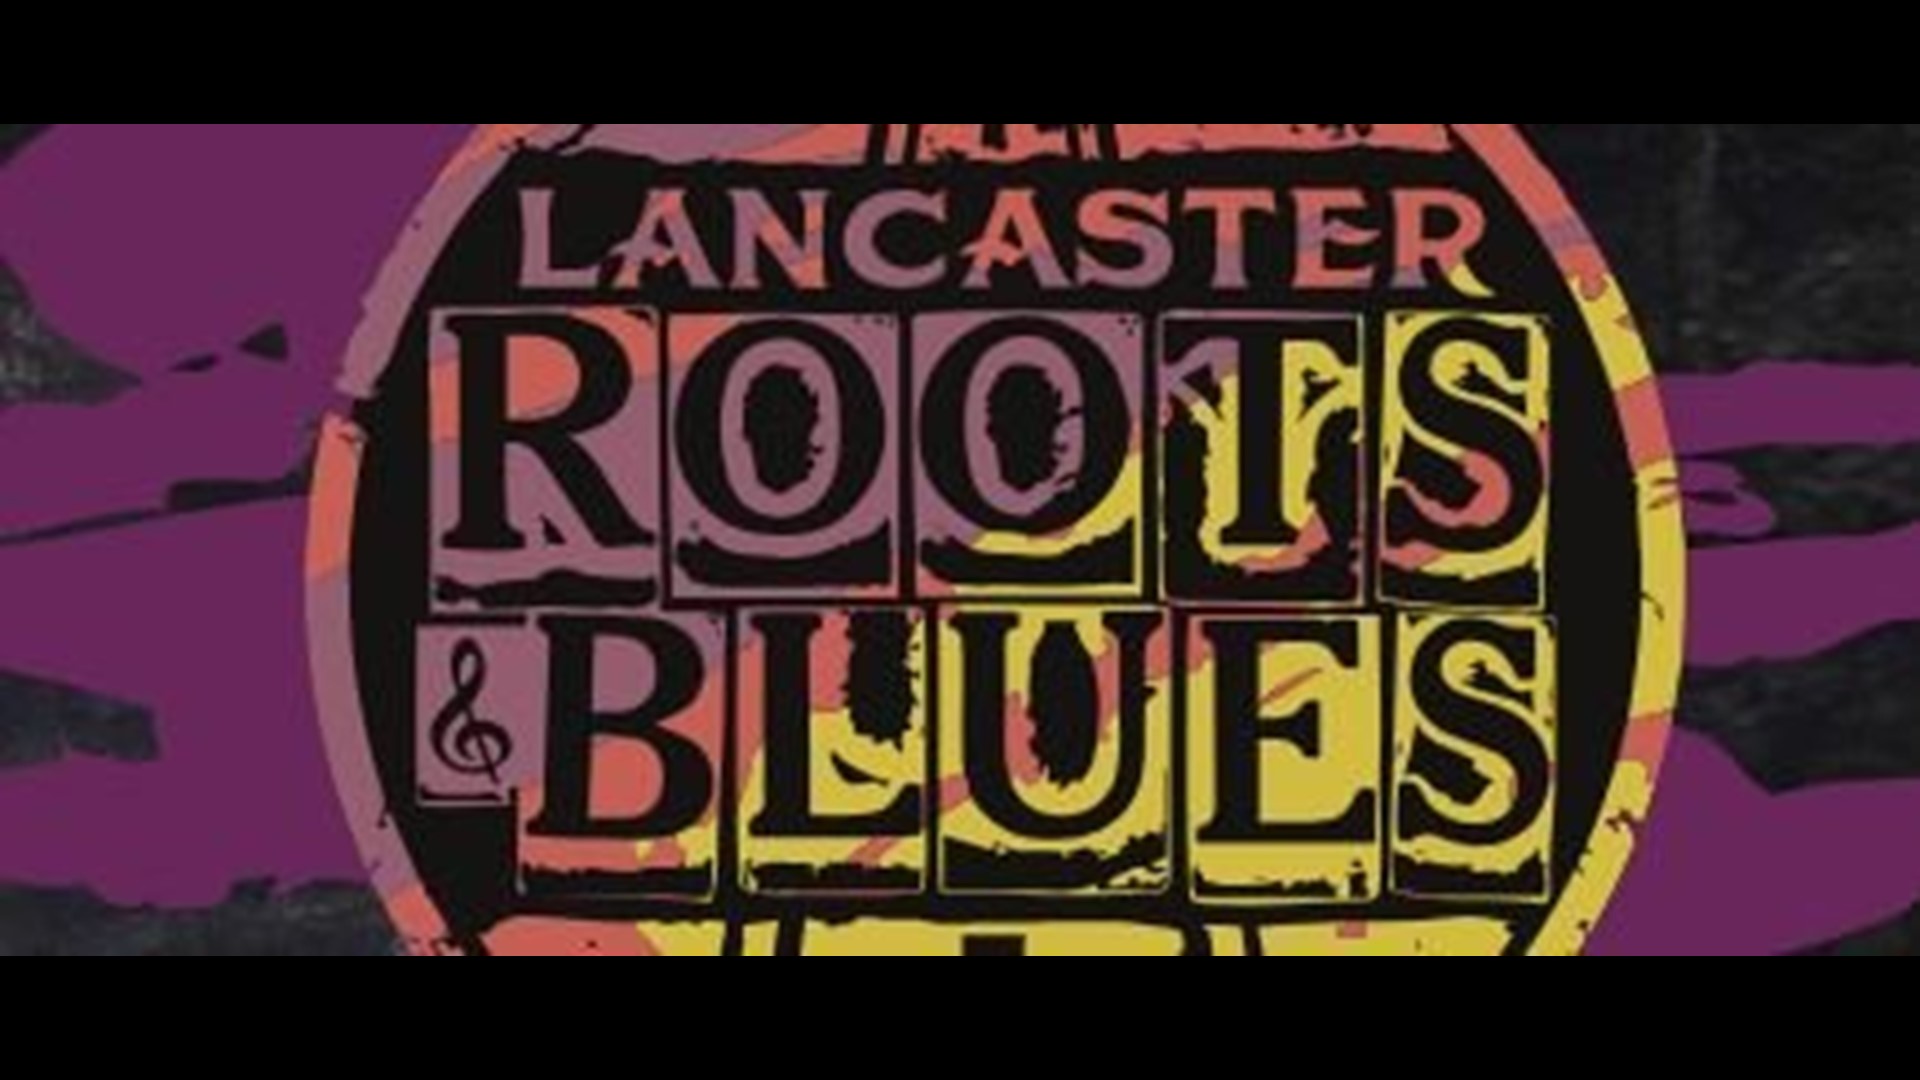 5th annual Lancaster Roots & Blues Festival kicks off tonight; Here’s